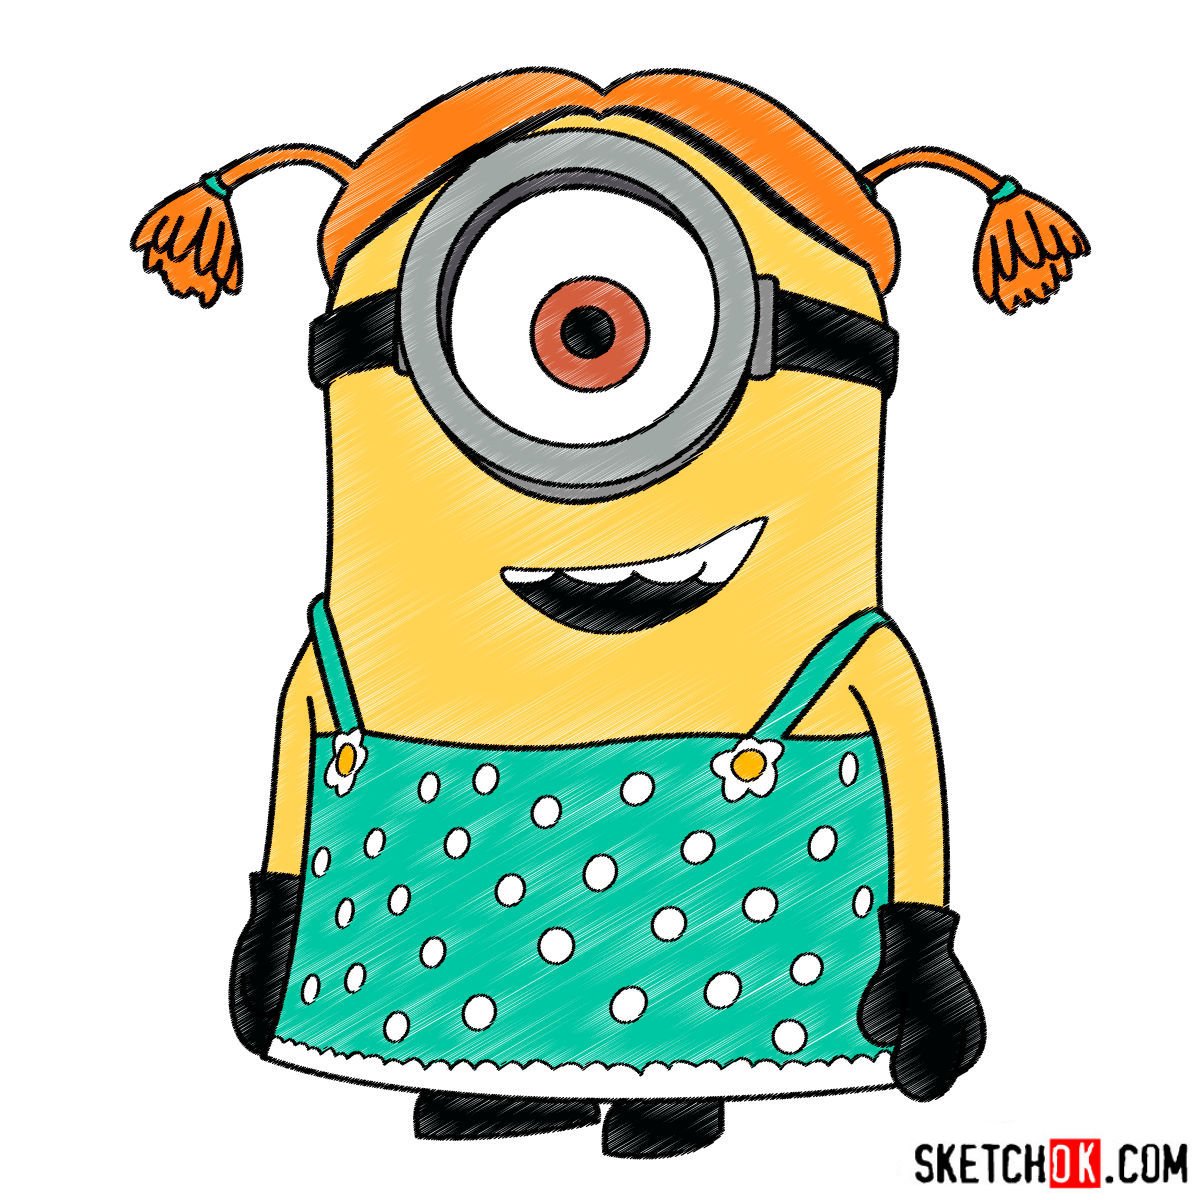 How to draw minion Stuart dressed as a girl - Sketchok easy drawing guides